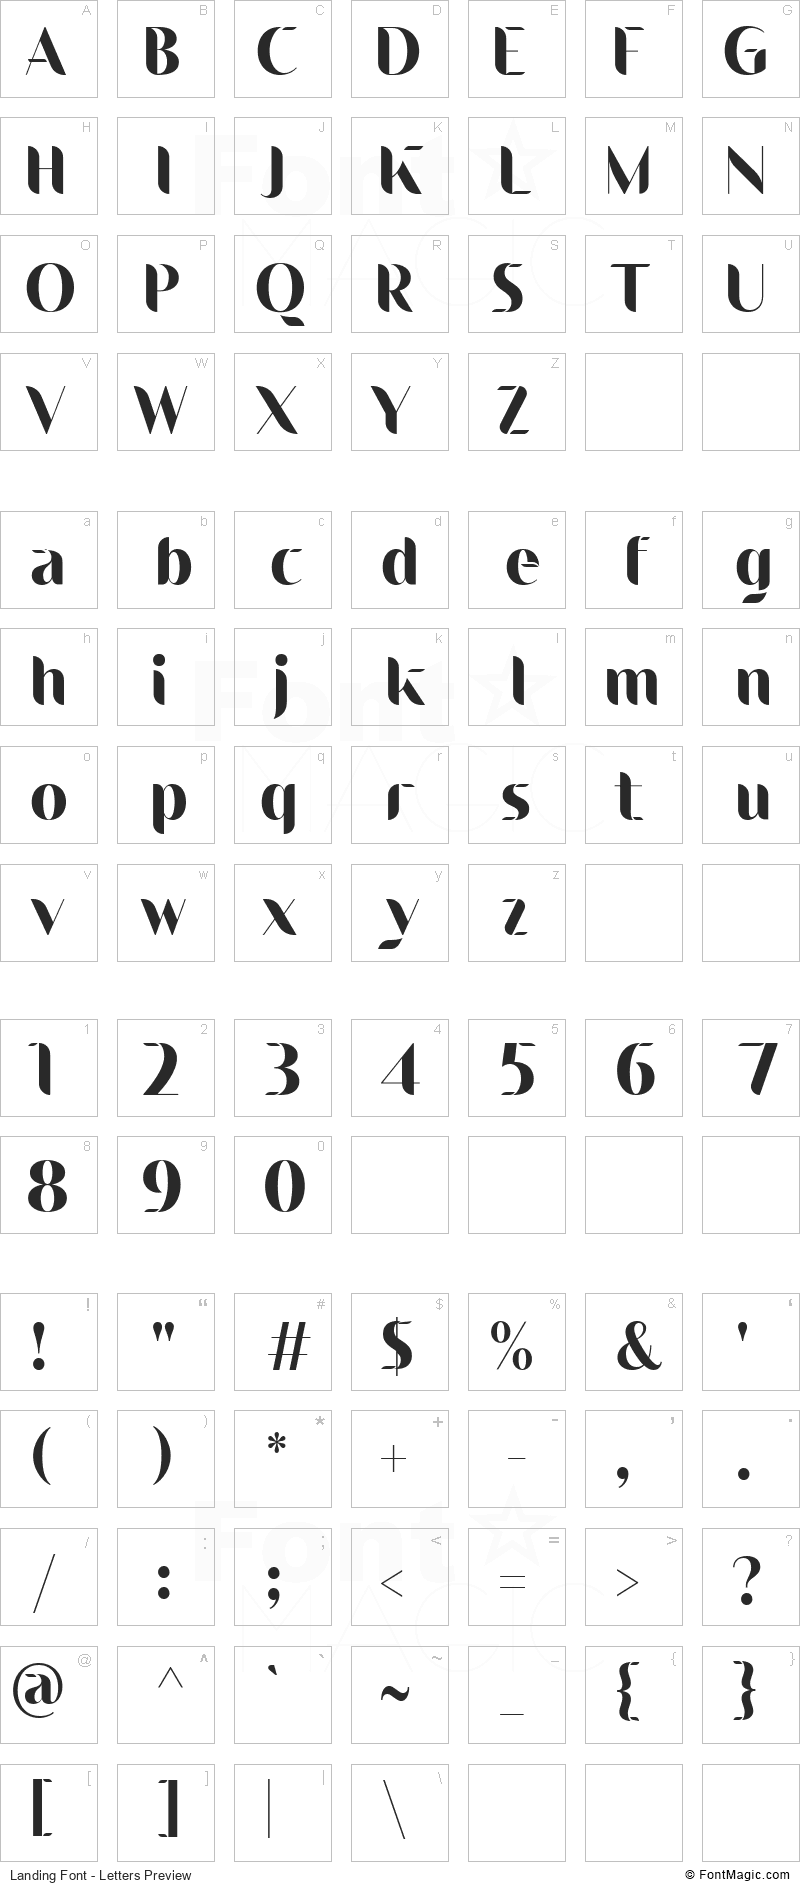 Landing Font - All Latters Preview Chart